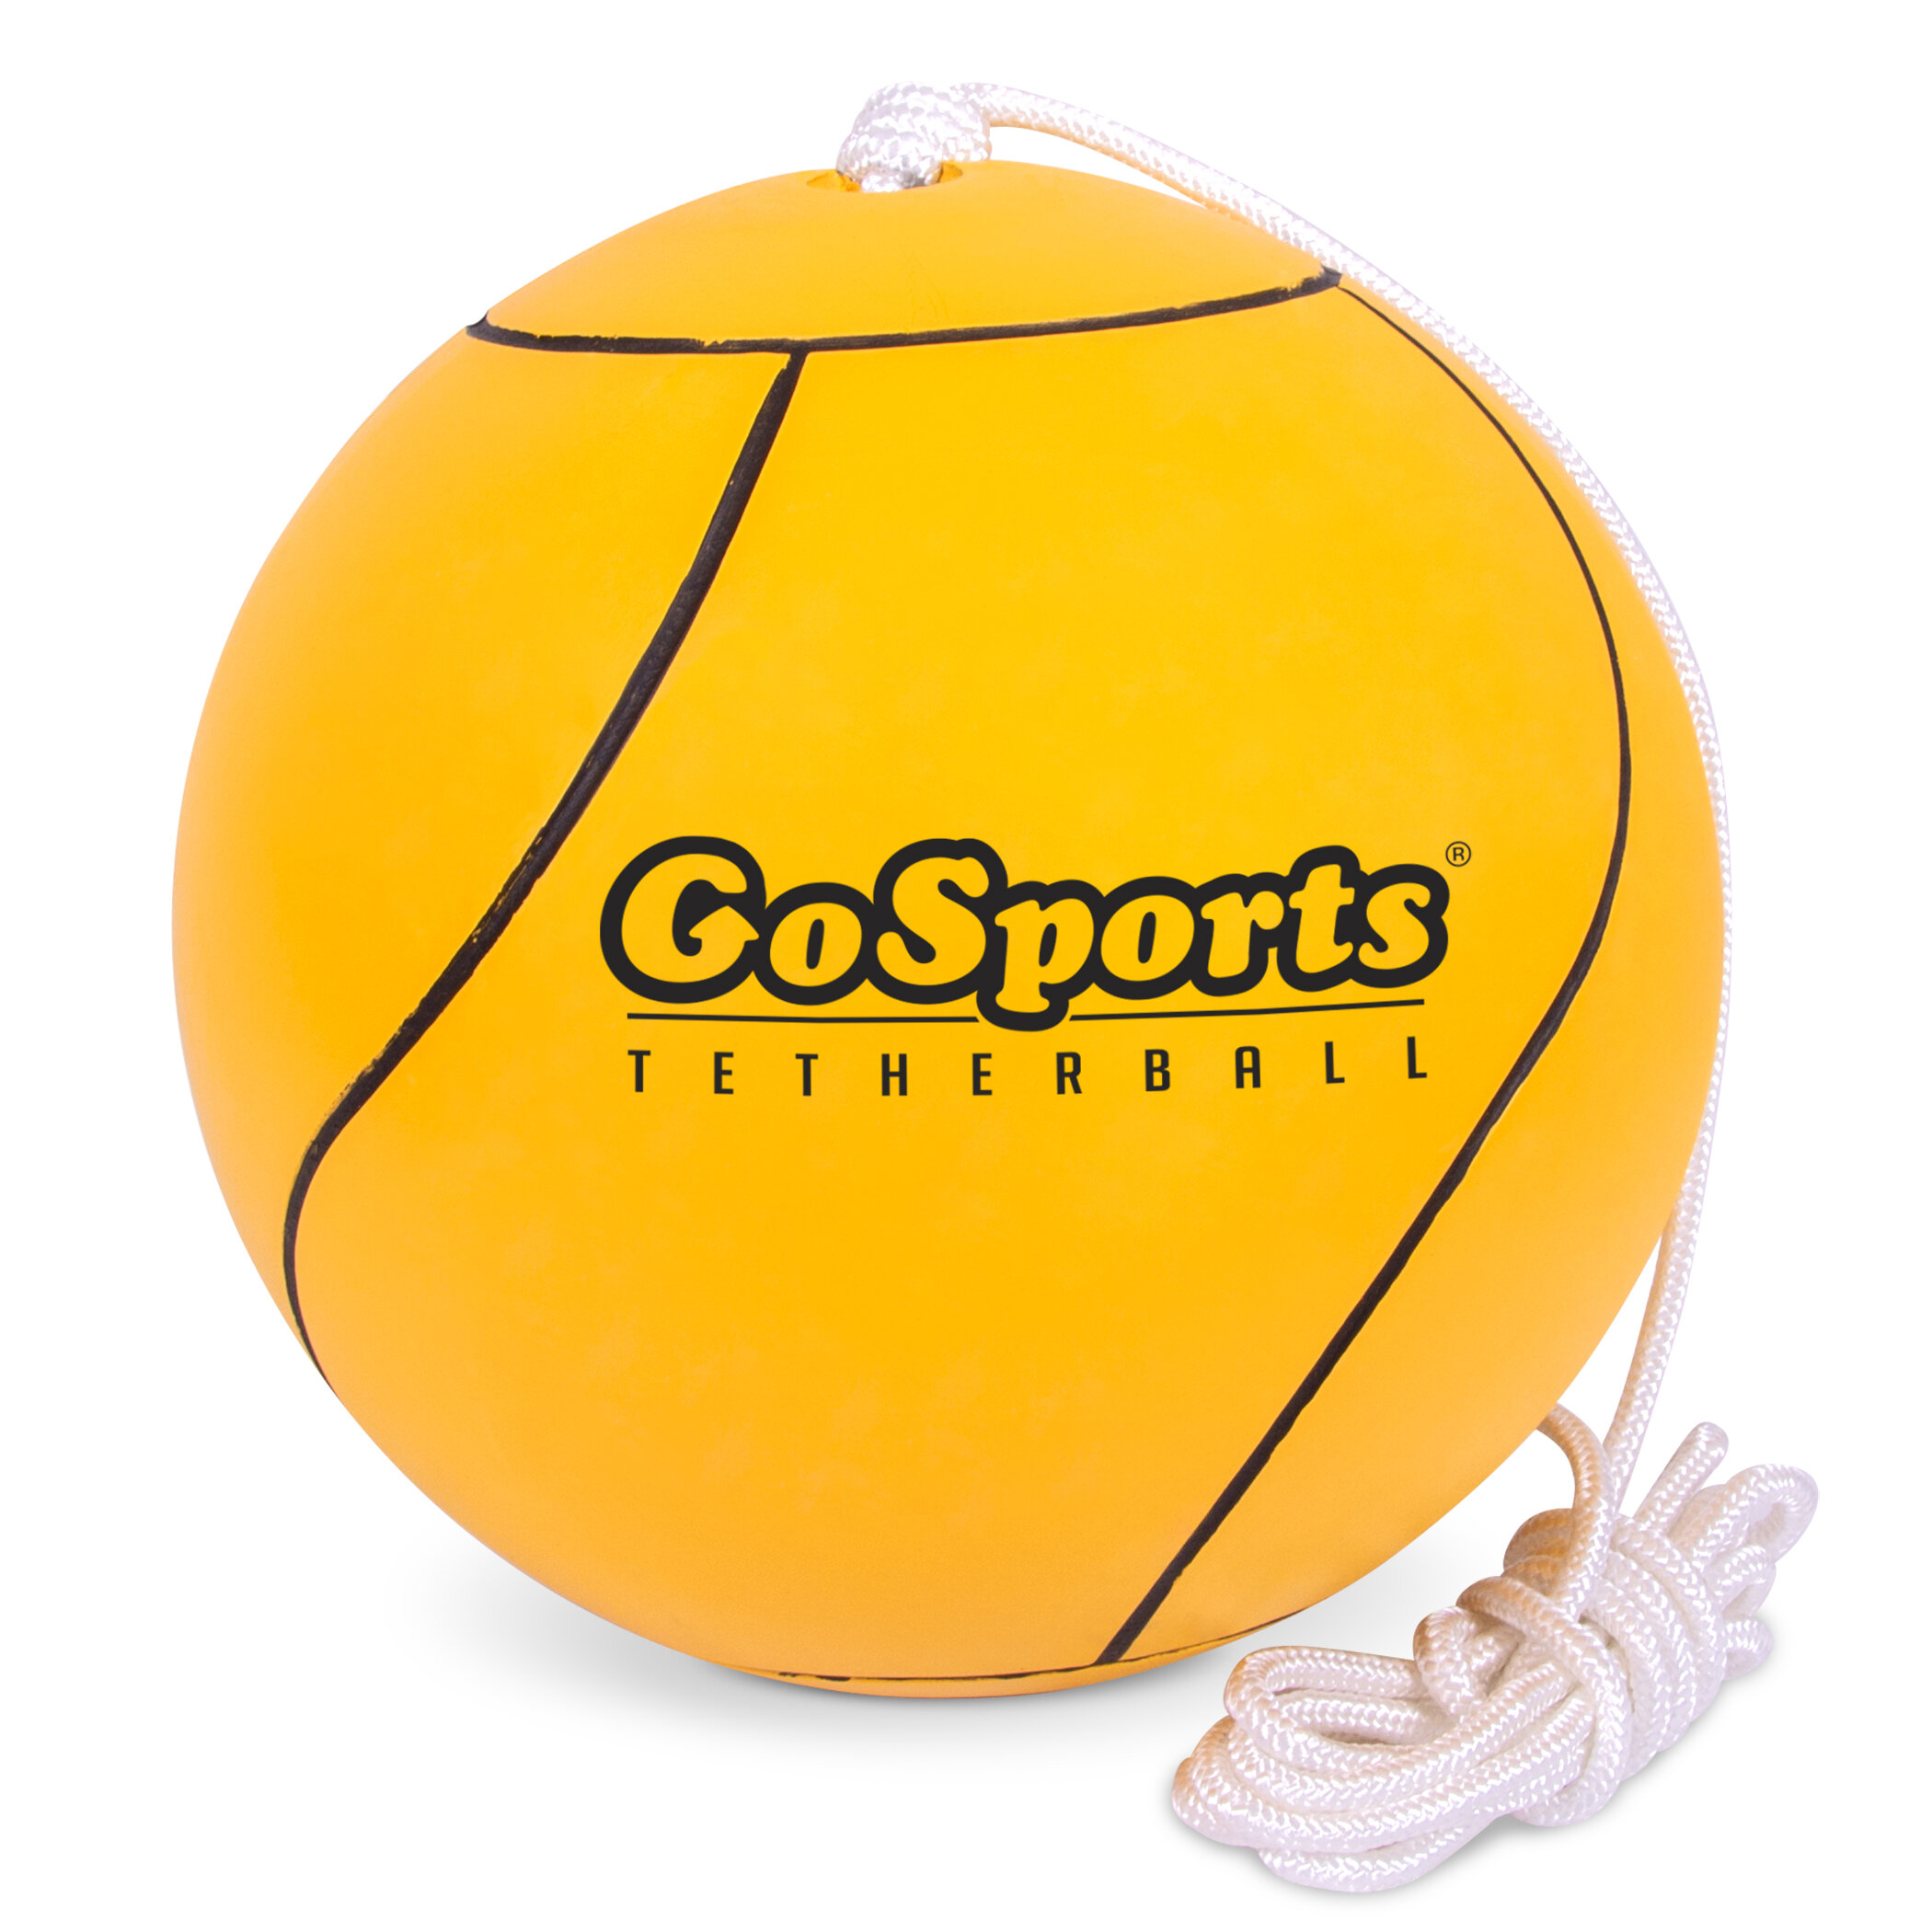 Gosports Tetherball And Rope Set, Full Size Backyard Outdoor